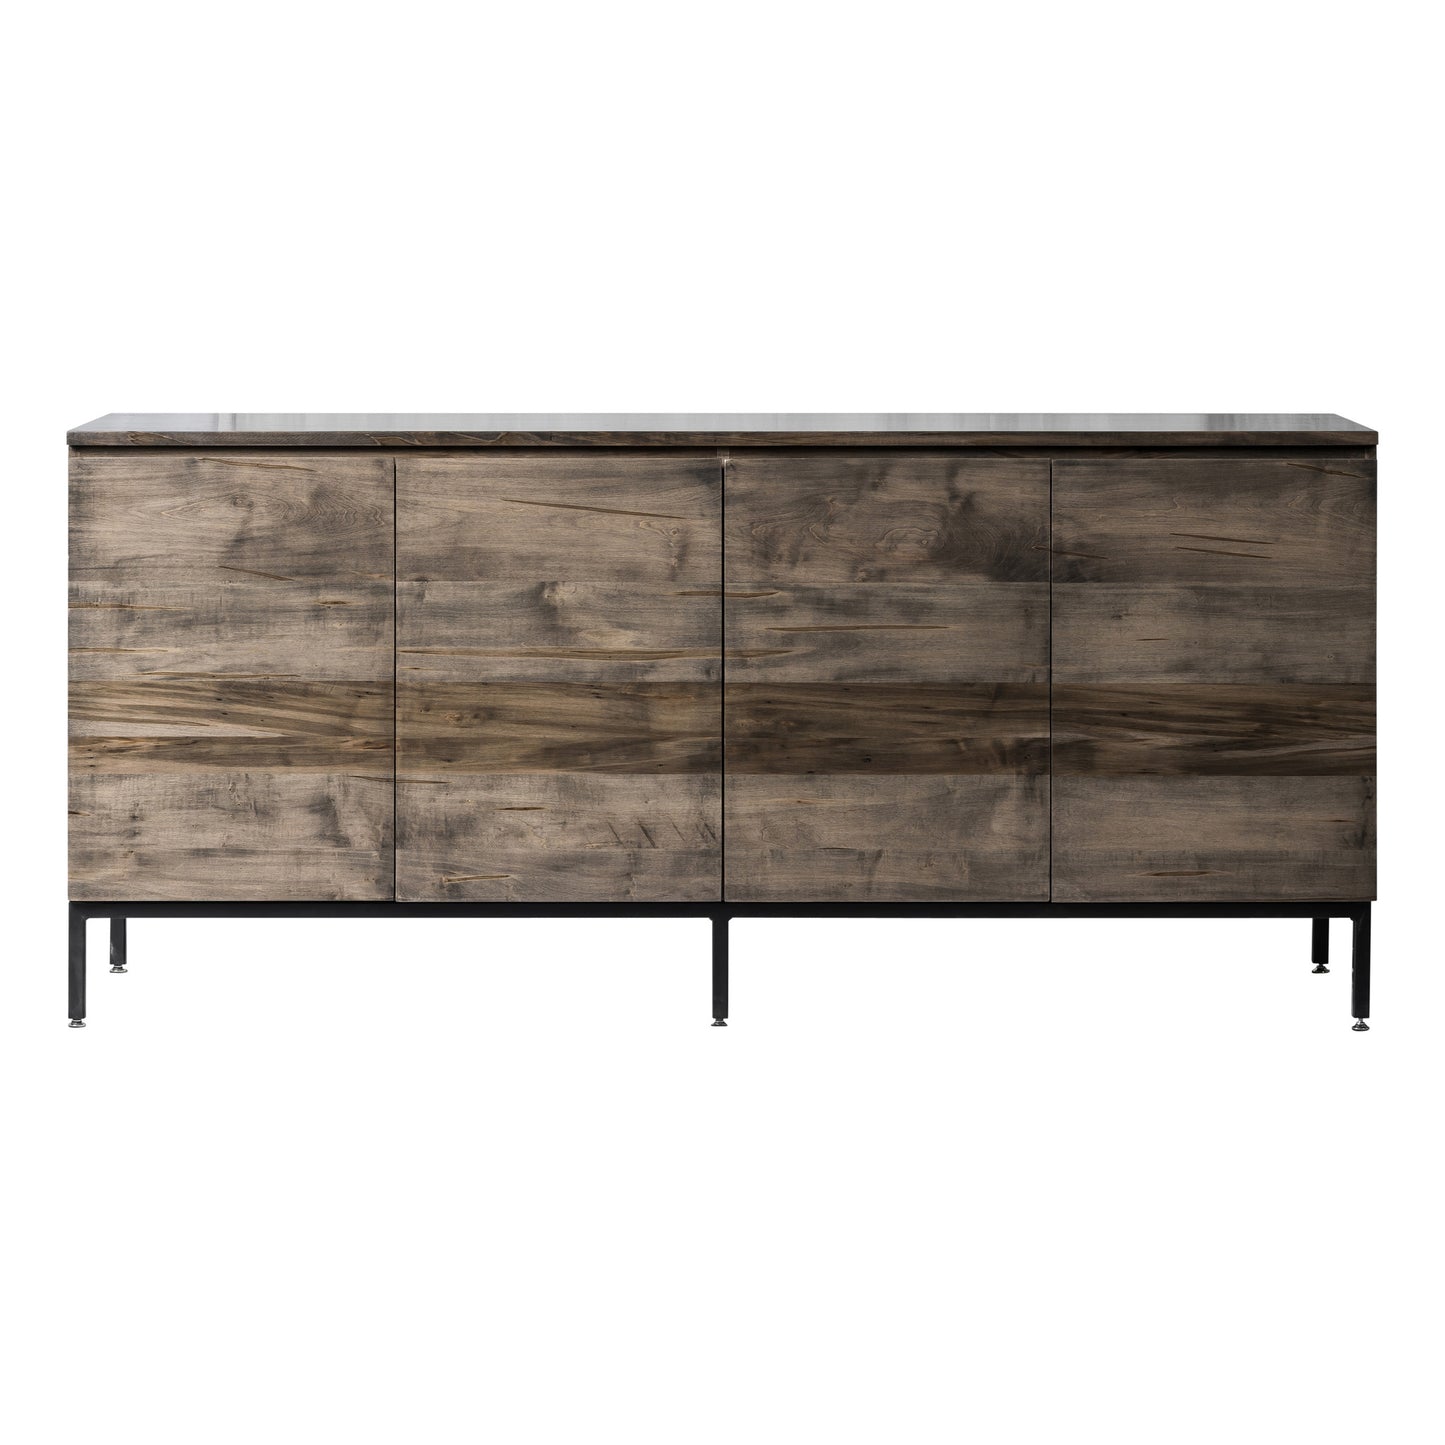 French River Sideboard